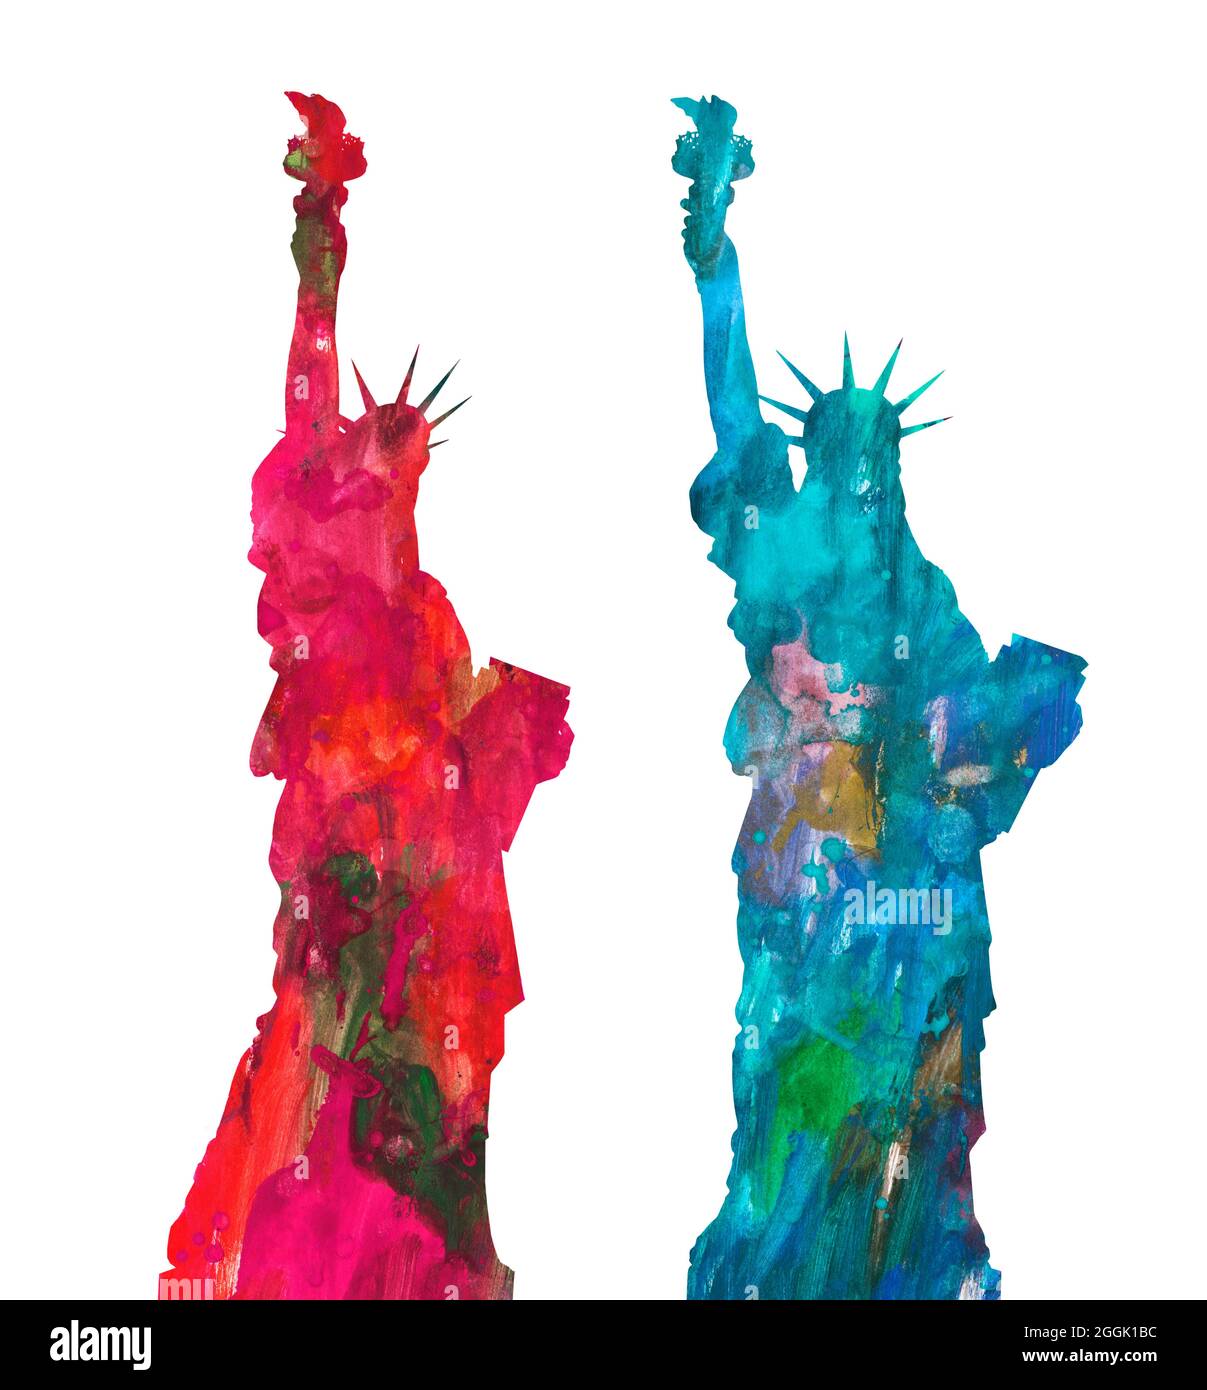 Red and blue statue of liberty in watercolor Stock Photo